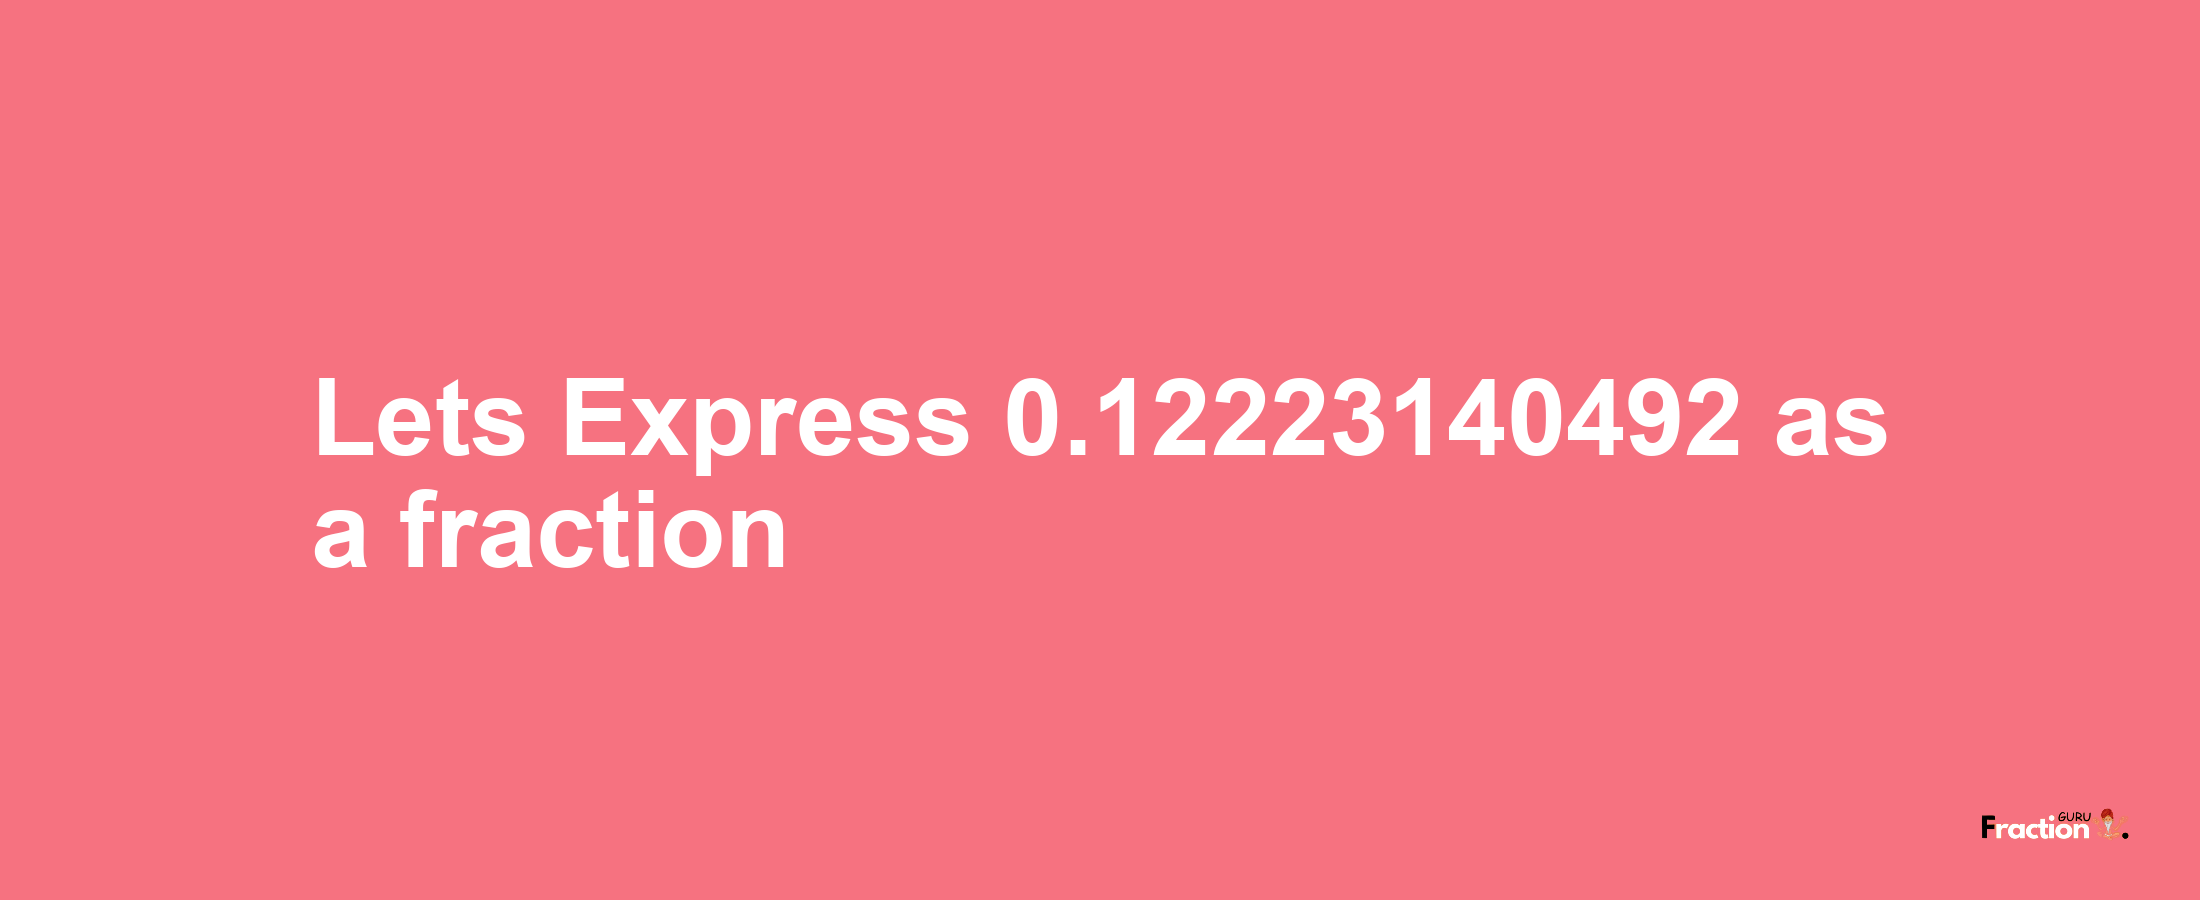 Lets Express 0.12223140492 as afraction